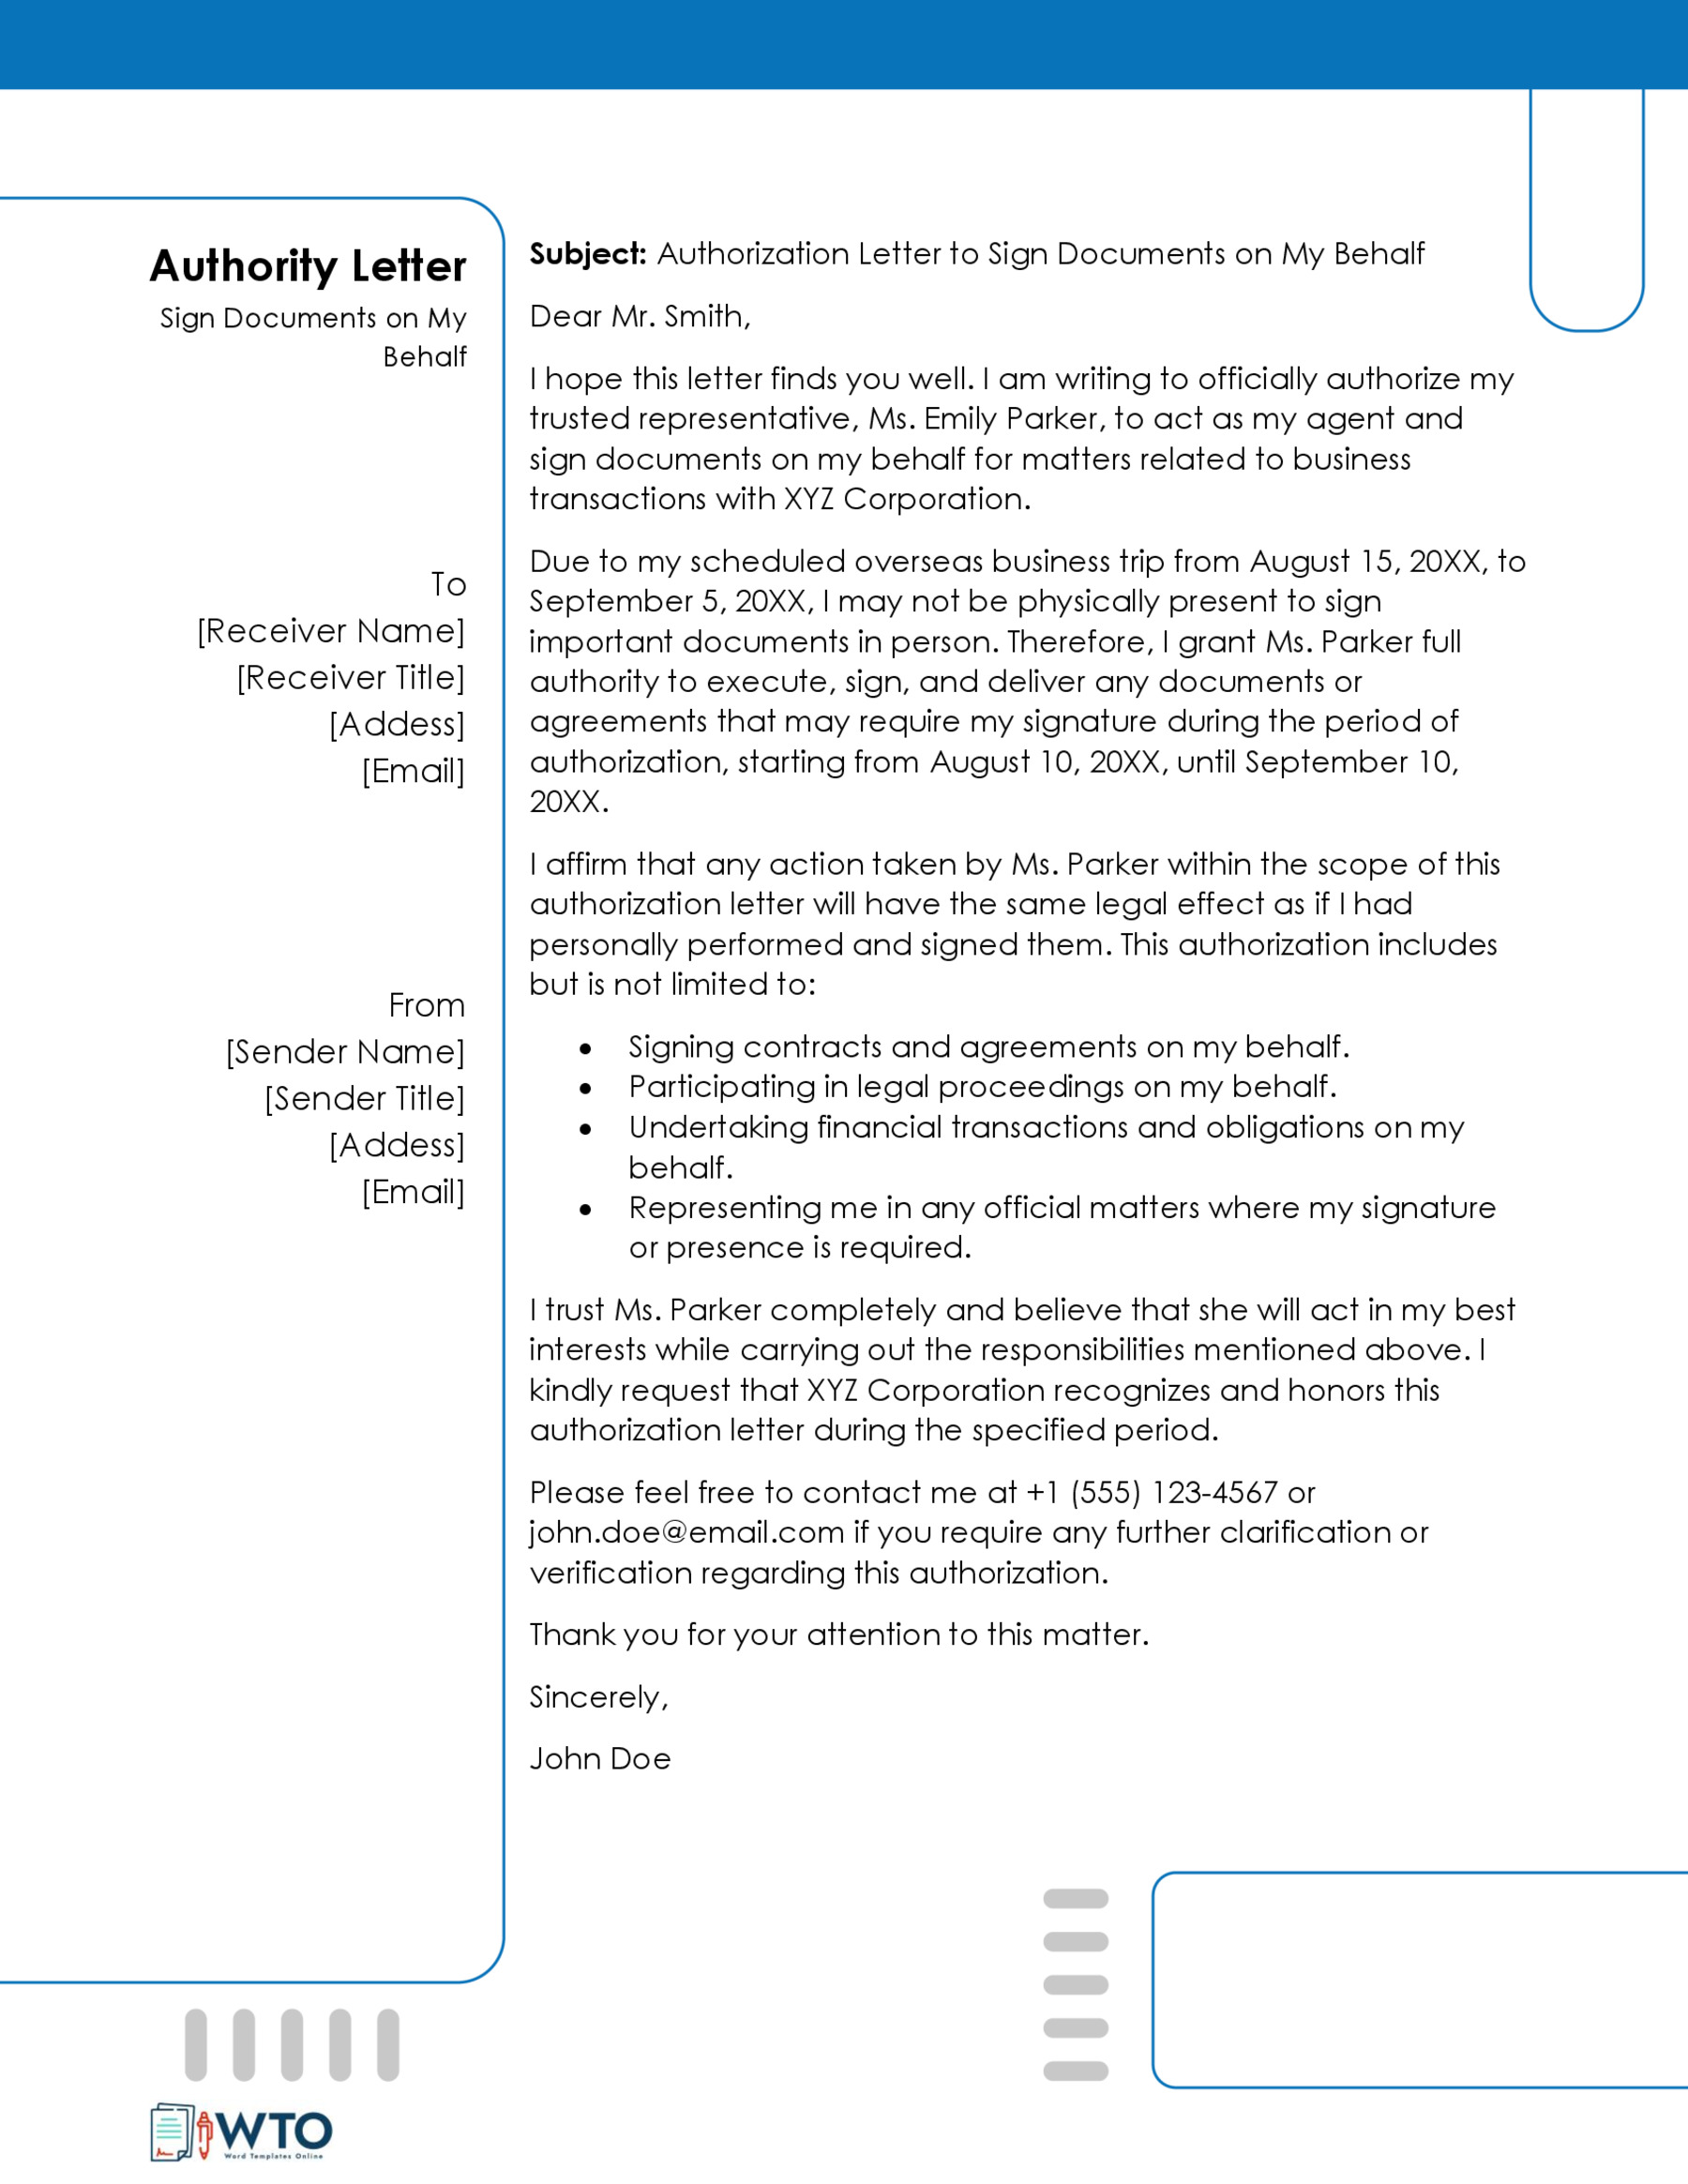 Sample Authorization letter to to Sigh Documents-Word Format